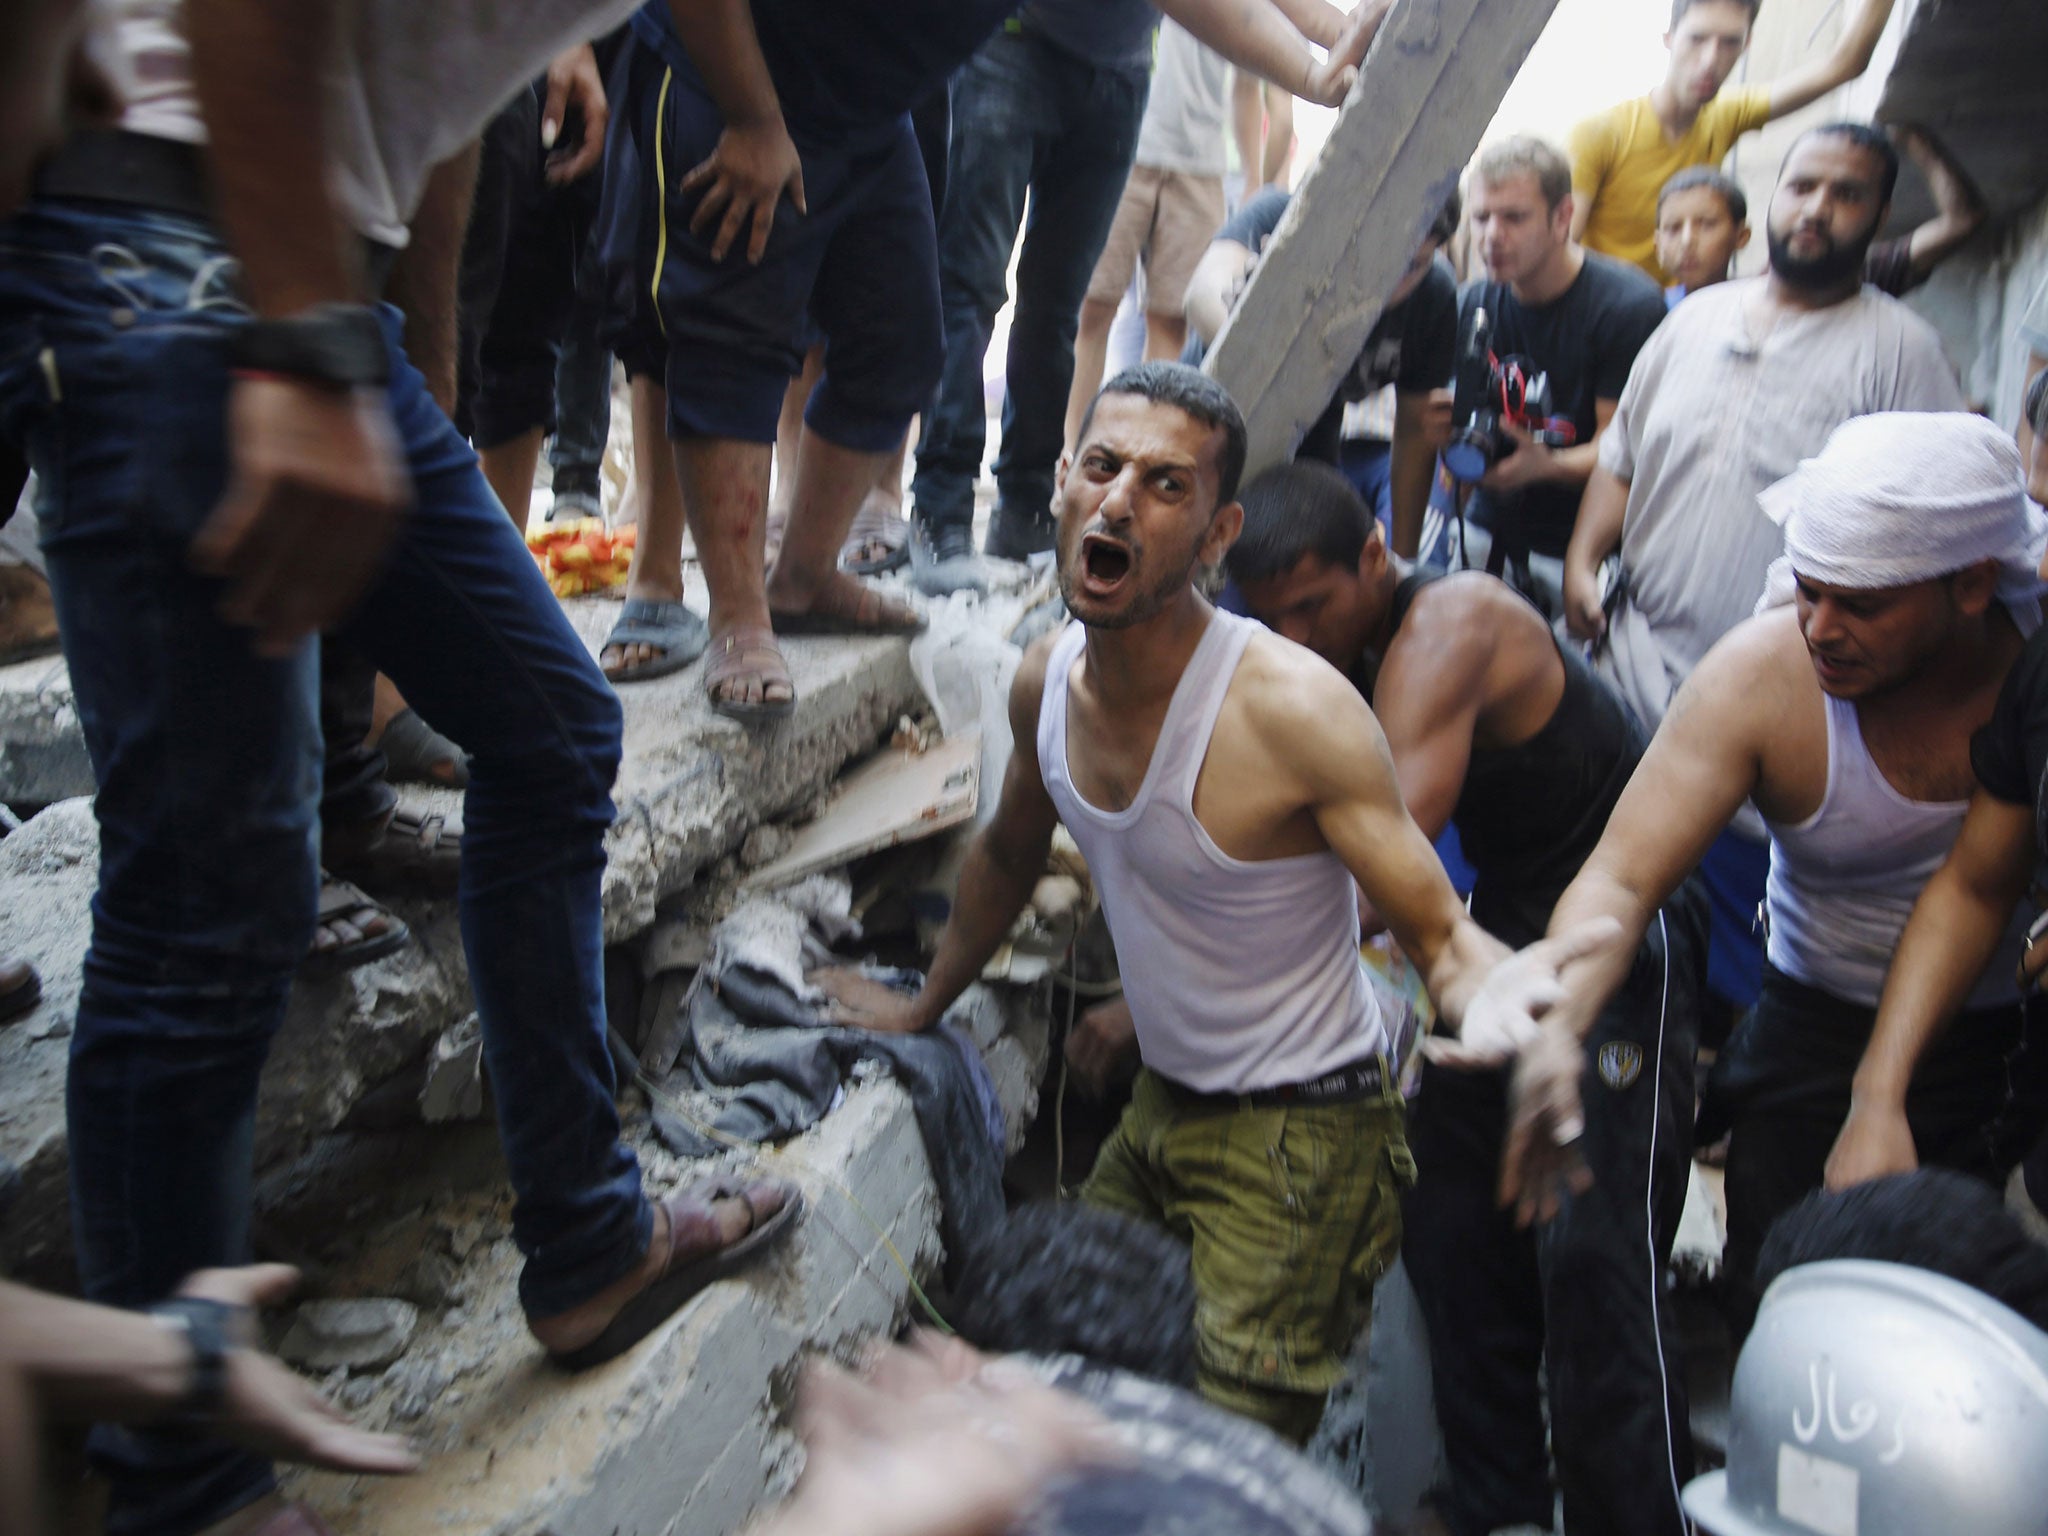 An appalling and unrelenting cycle: Palestinians dig through the rubble of a building searching for bodies